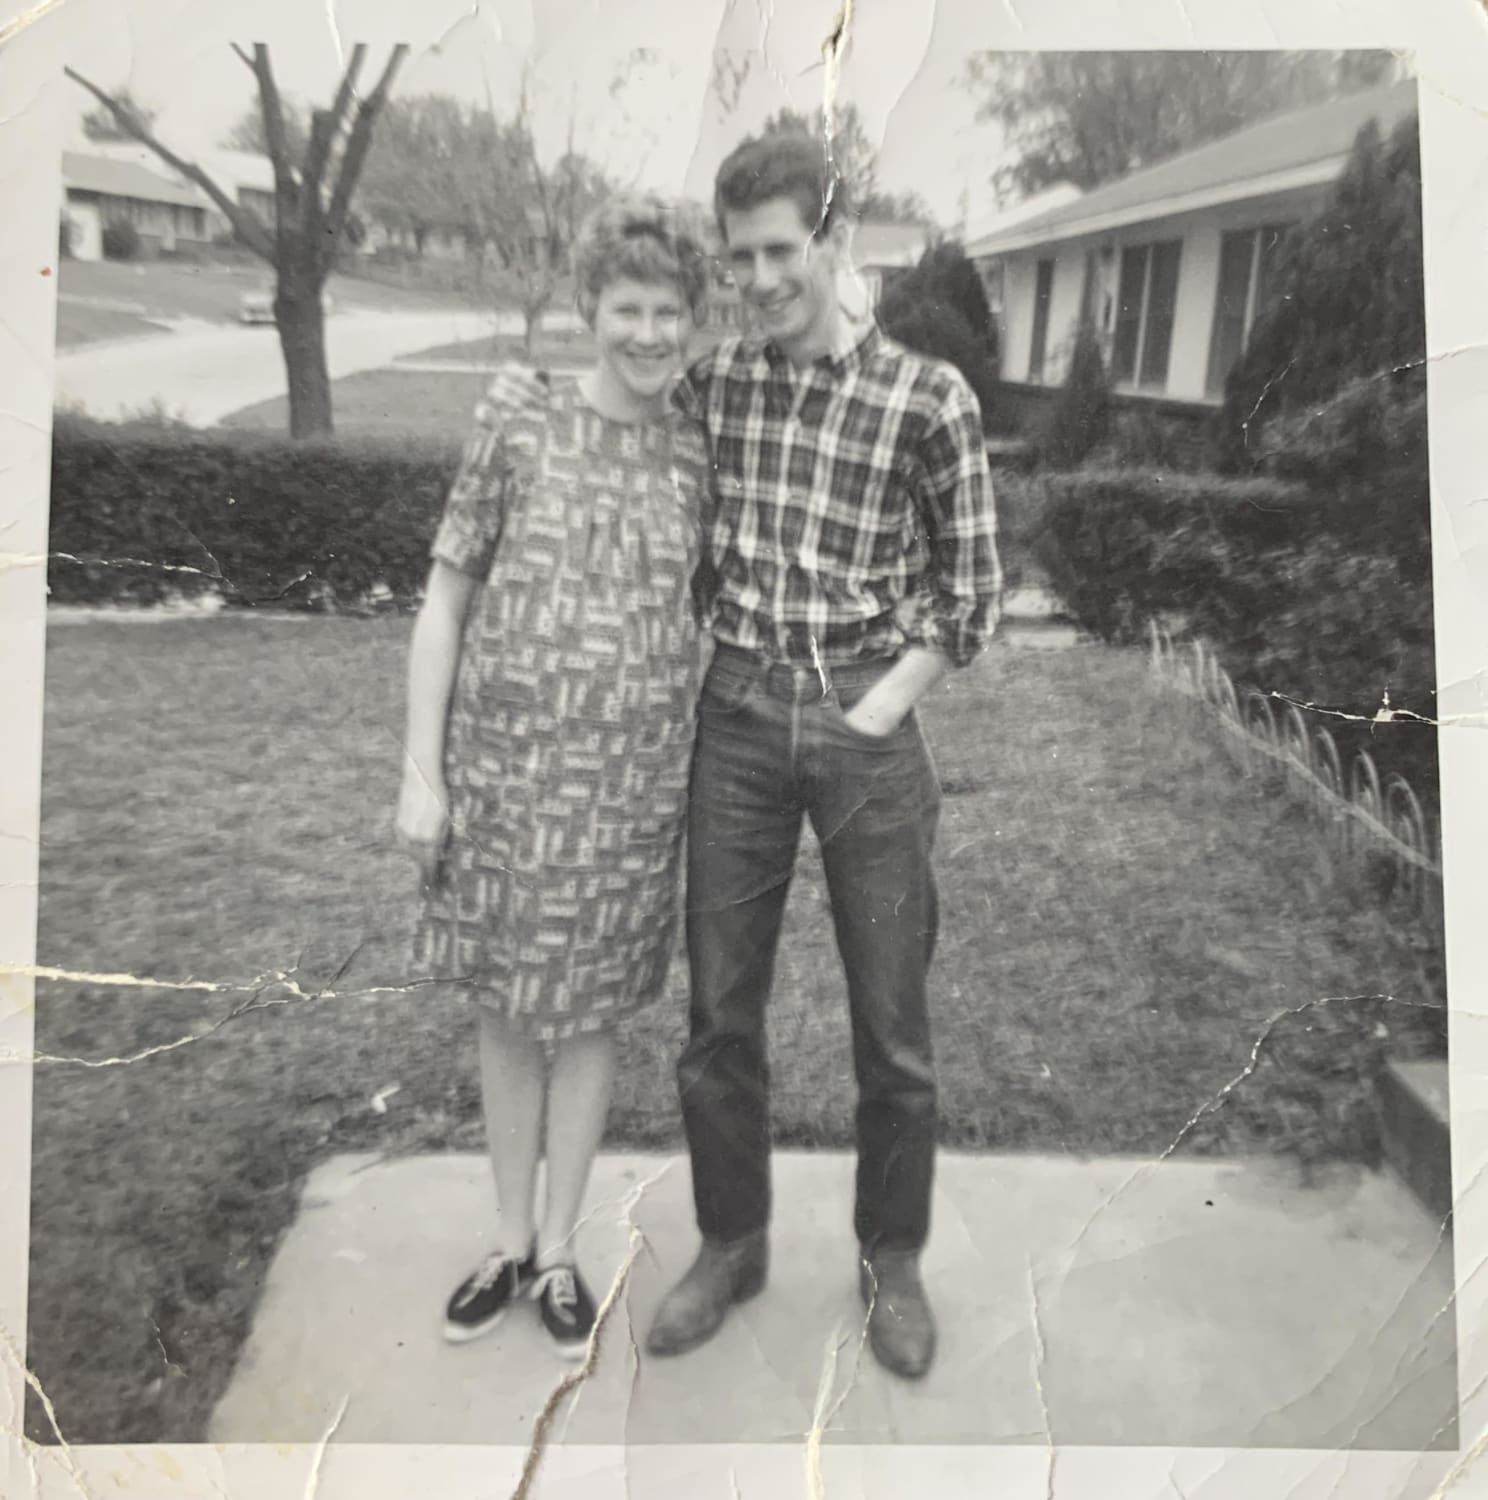 Another photo of my grandparents, Jack and Sue. This was in 1966 in Sand Springs, Oklahoma, when my grandmother was newly married and pregnant.